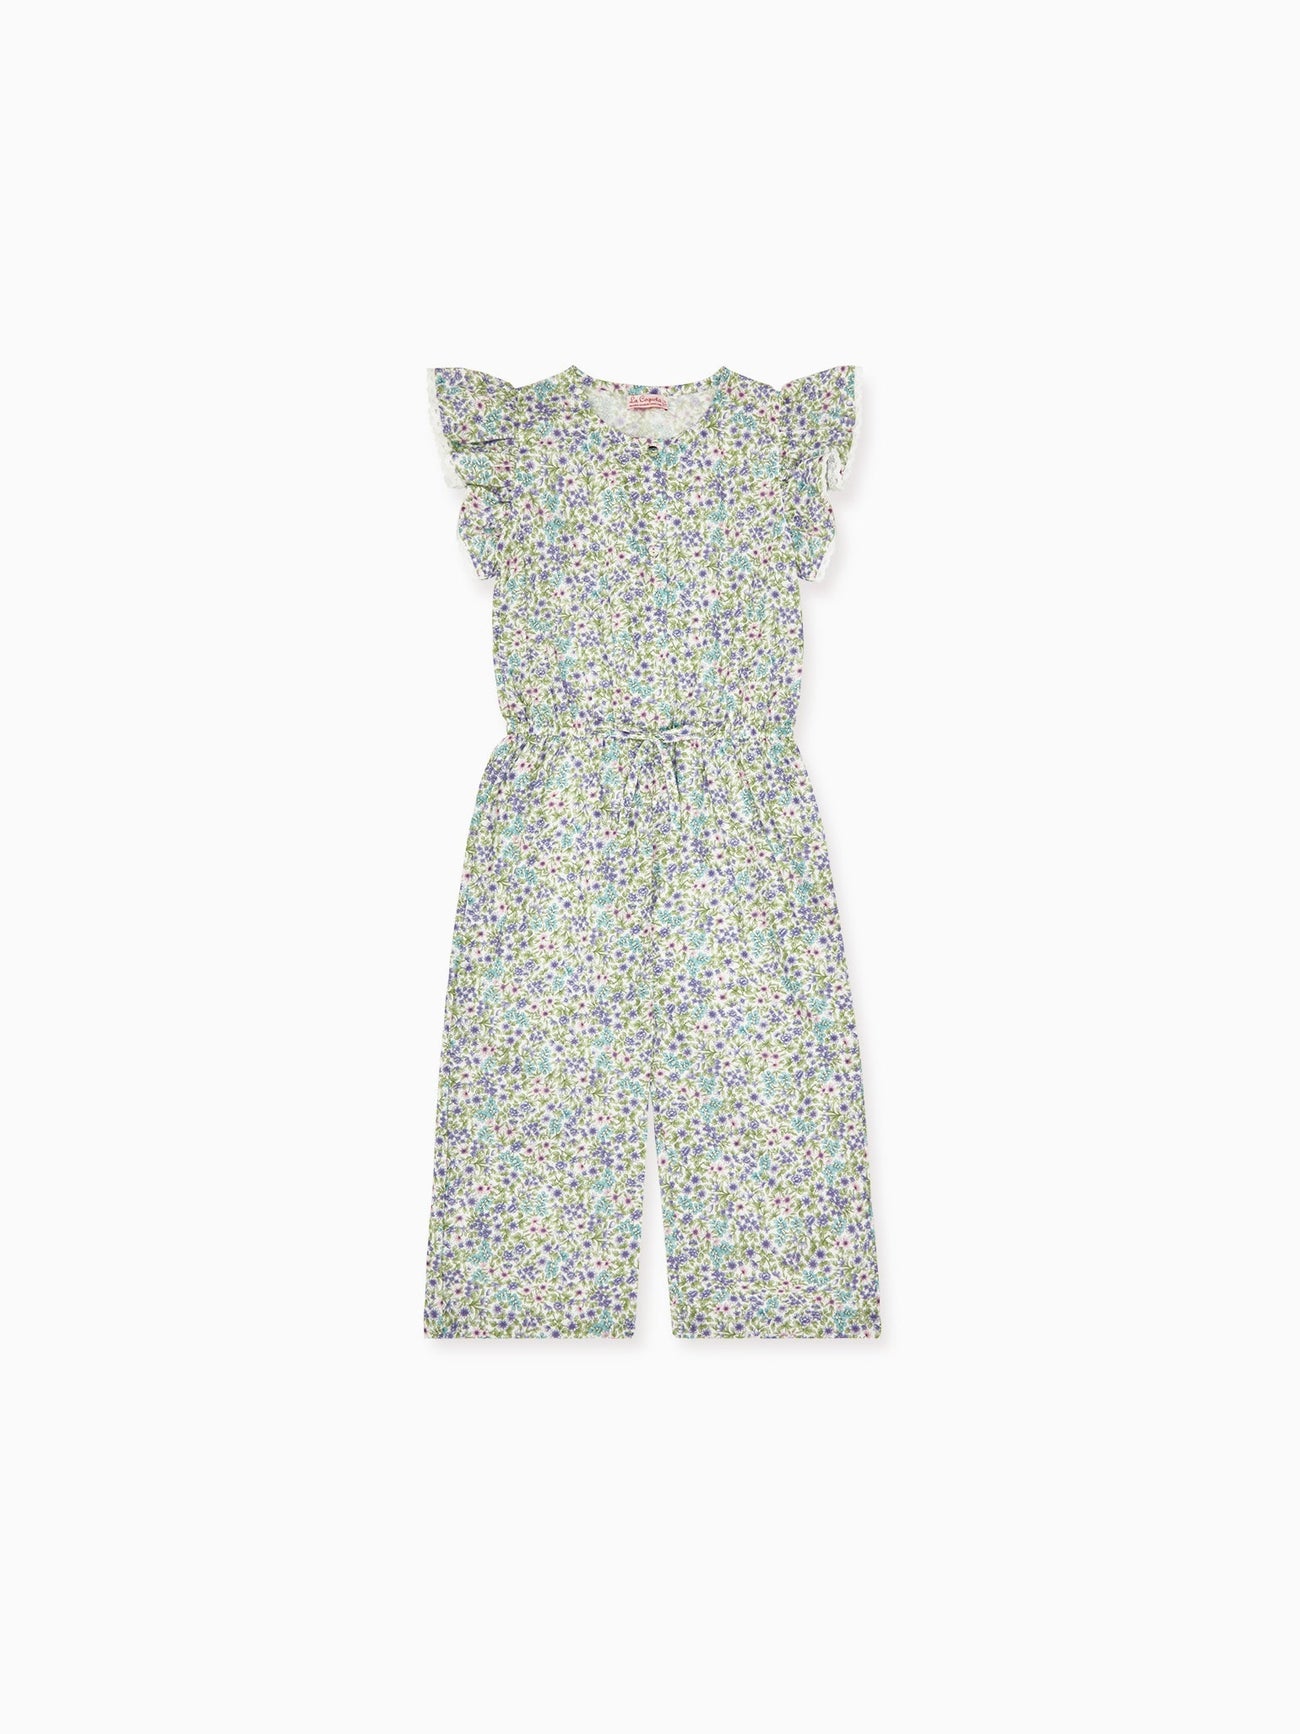 Green Floral Carina Girl Jumpsuit